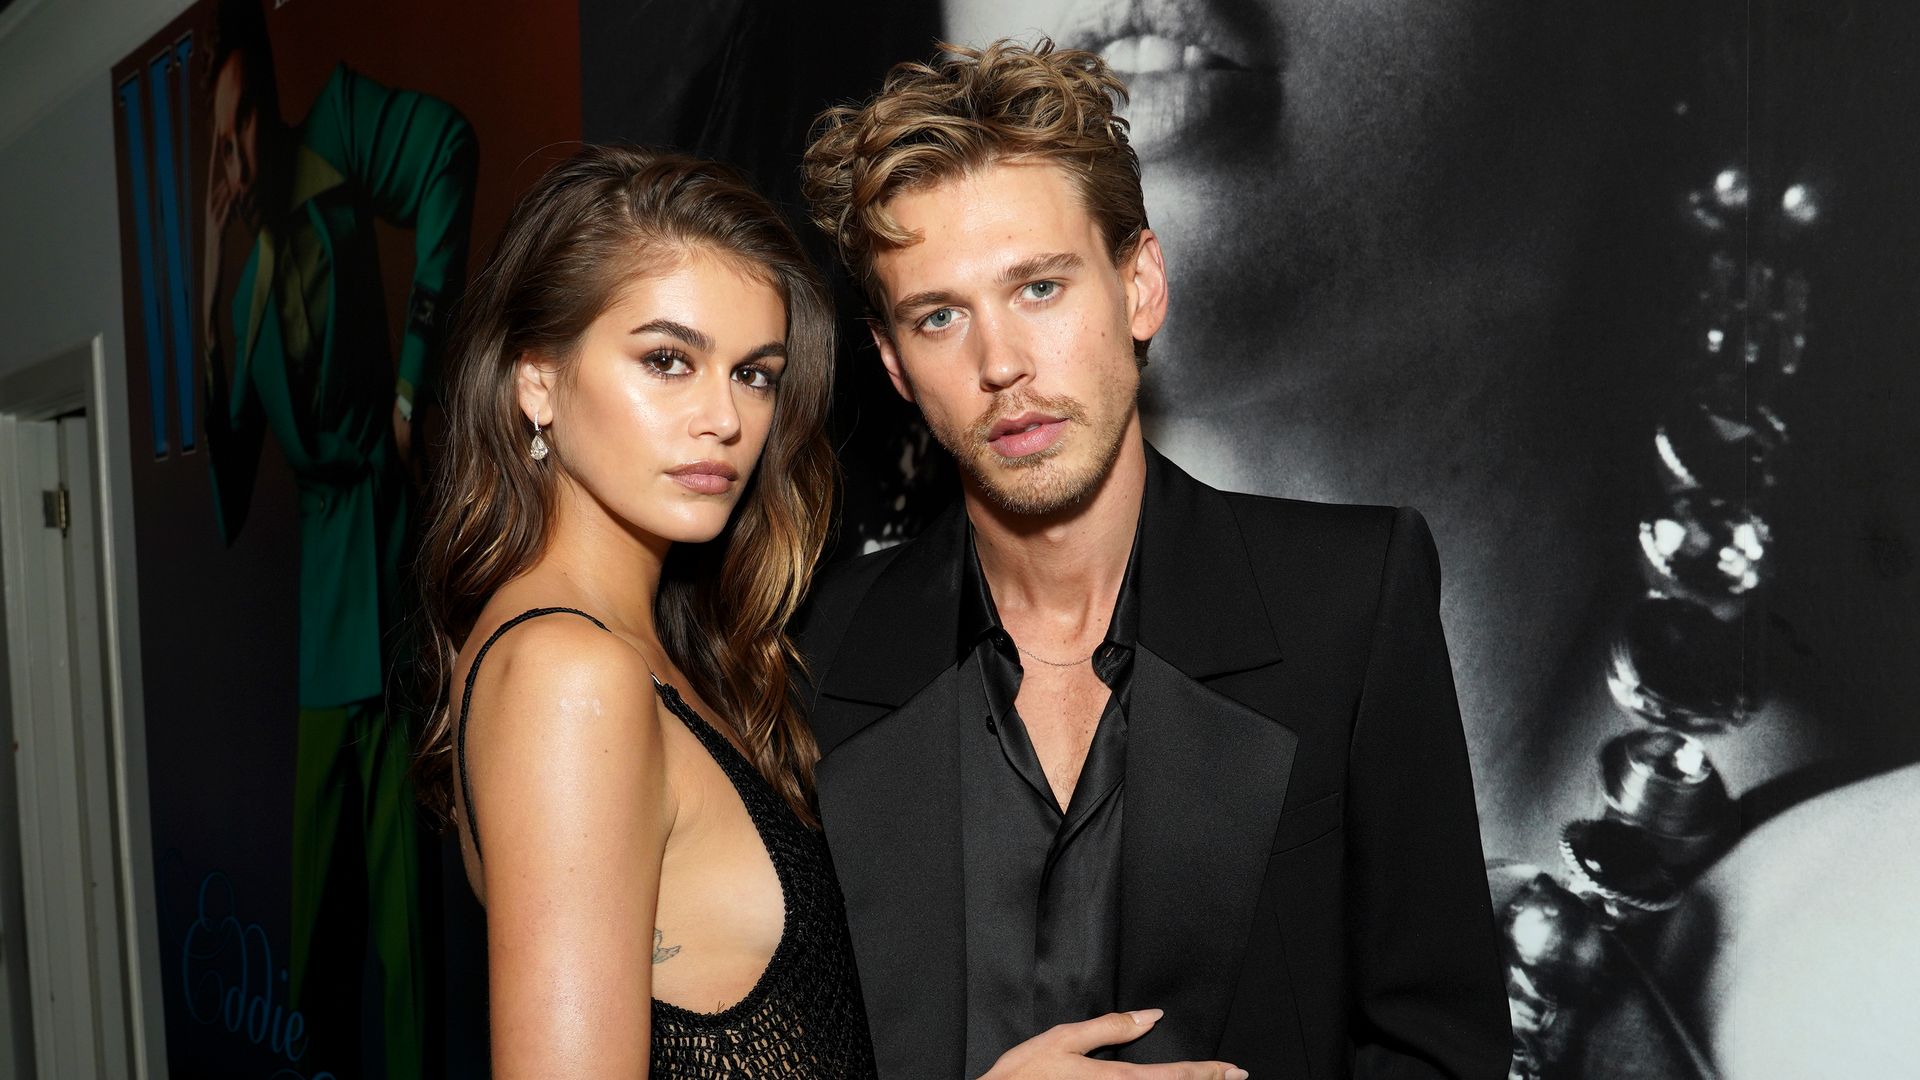 Kaia Gerber and Austin Butler attend W Magazine's Annual Best Performances Party at Chateau Marmont on February 24, 2023 in Los Angeles, California